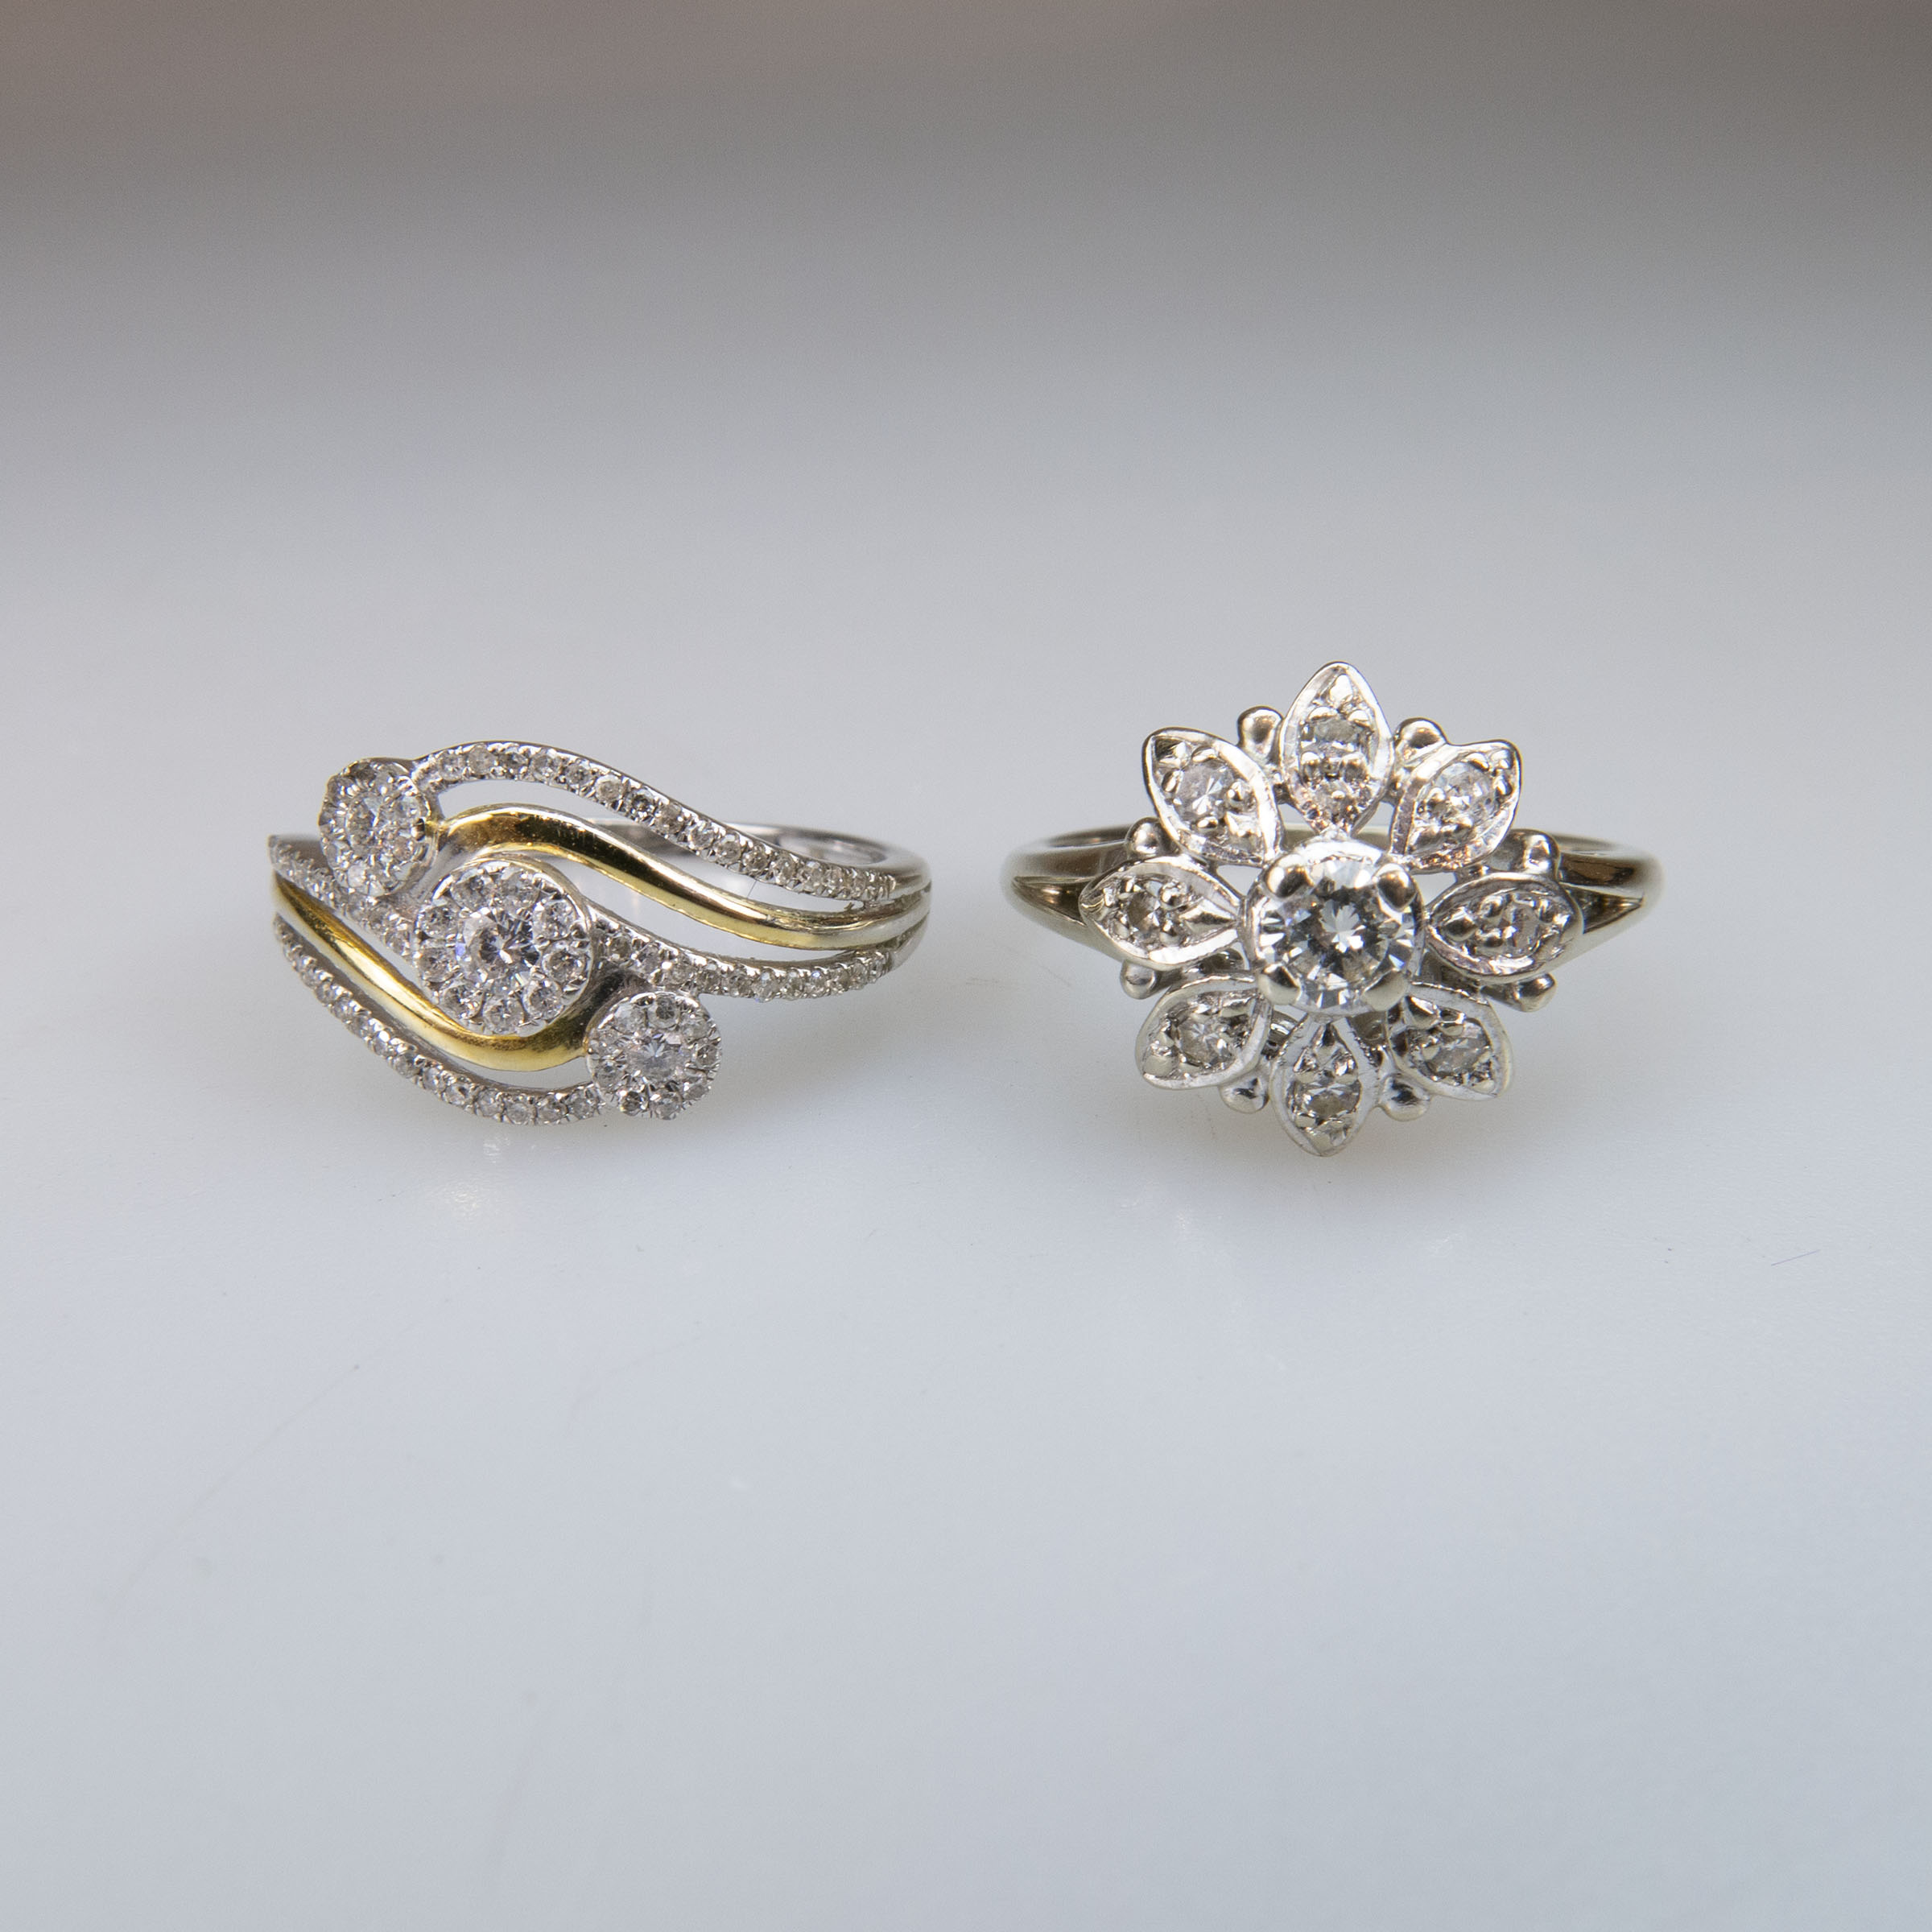 2 x 14k White And Yellow Gold Rings